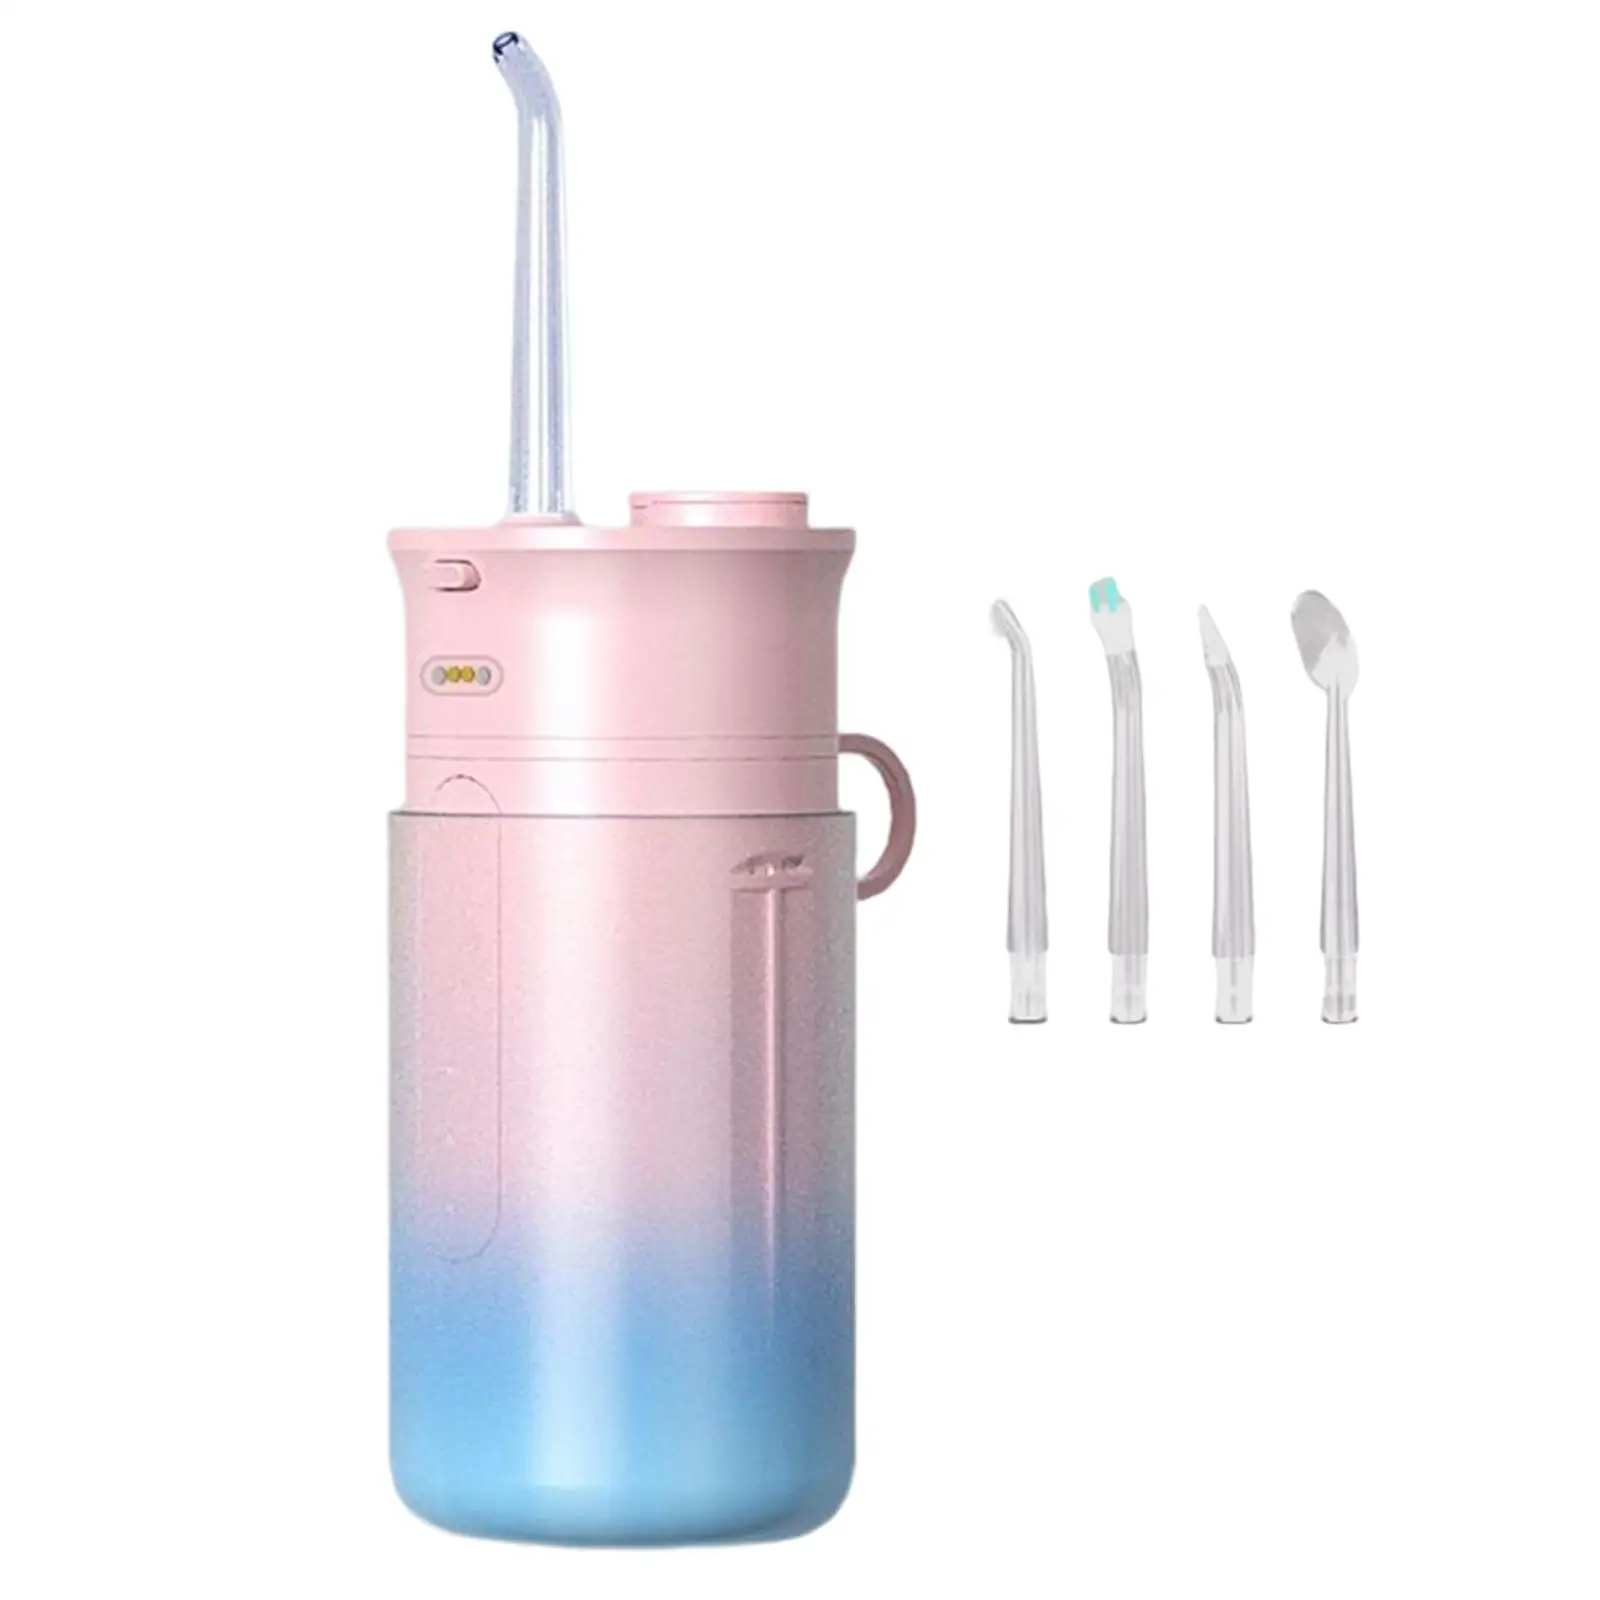 Cordless Oral Irrigator Electric Flosser 200ml for Home Use Travel